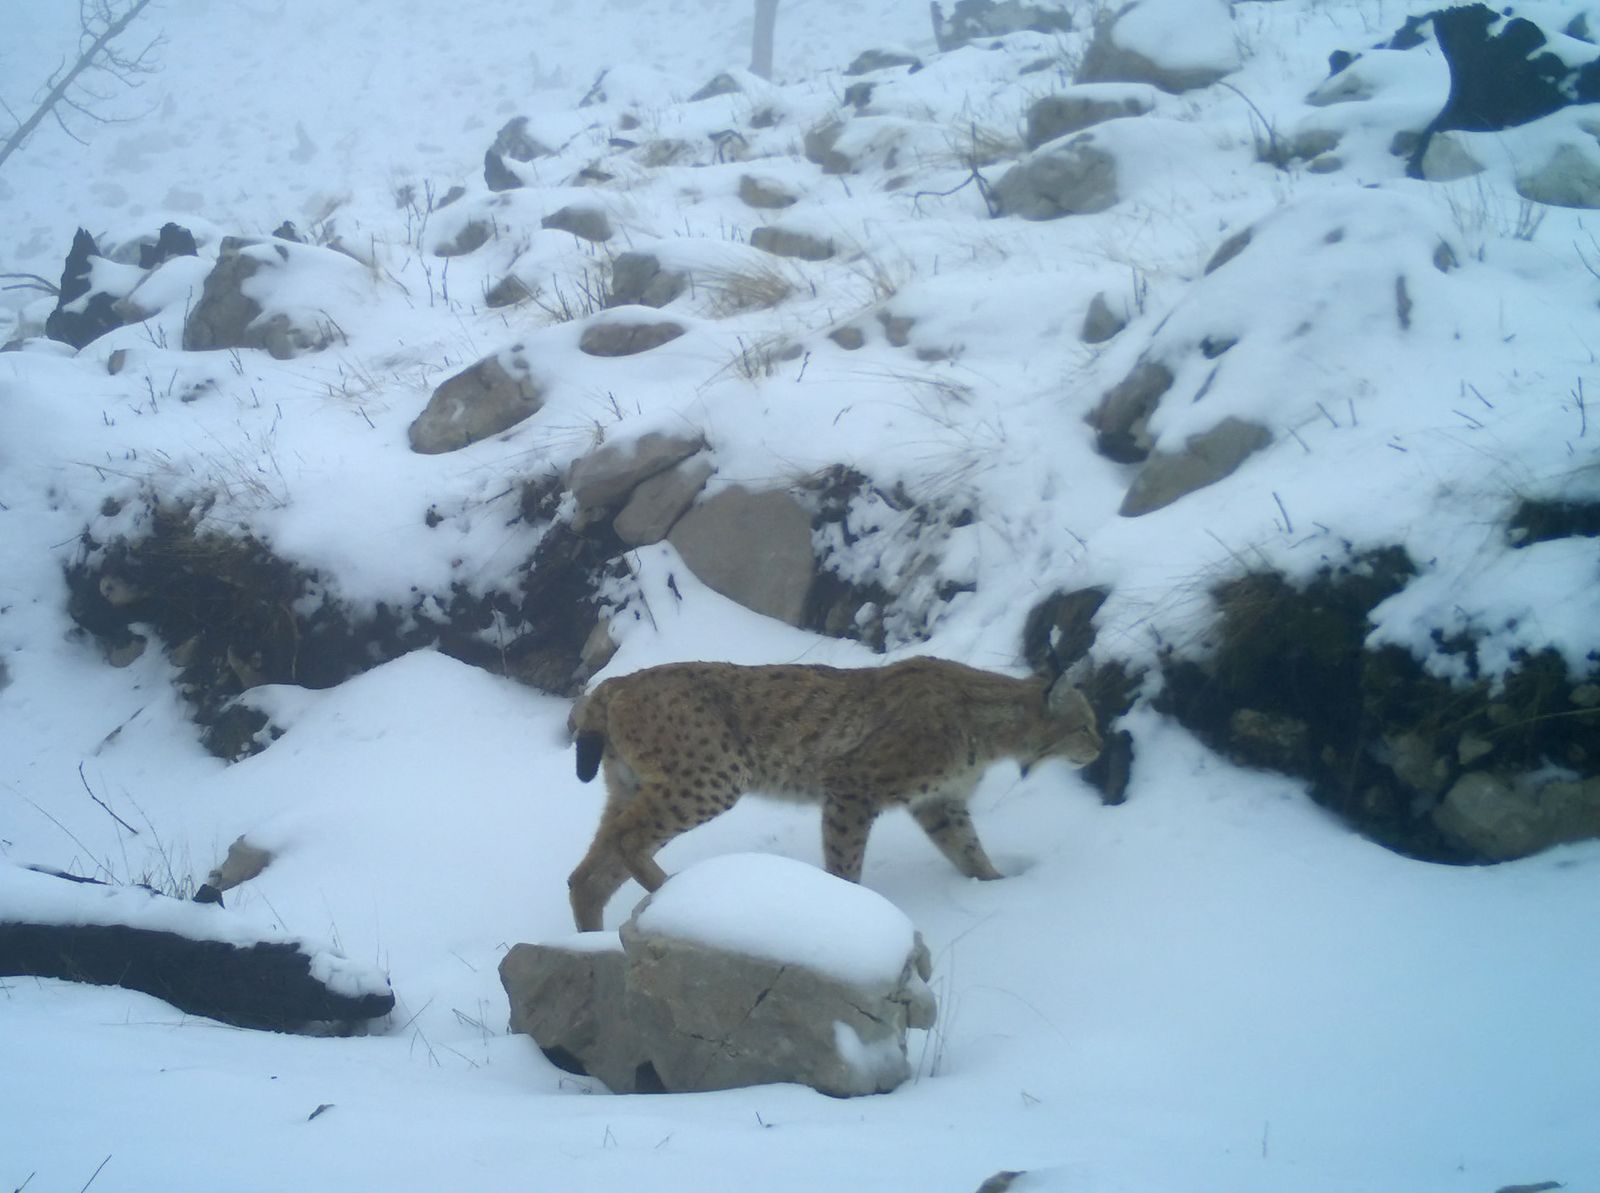 This handout photograph from a wildlife trail camera, taken by the non-governmental organization of Protection and Preservation of Natural Environment in Albania (PPNEA) on April 20, 2022, shows a Balkan lynx in the Munelle mountains (Mali i Munelles), northen Albania. - Experts of the non-governmental organization Protection and Preservation of Natural Environment in Albania (PPNEA) are installing wildlife trail cameras and looking to find evidence of critically endangered Balkan lynx that are estimate fewer than 40 remaining in the Balkans, of which less than 10 in Albania. (Photo by Gent SHKULLAKU / Protection and Preservation of Natural Environment in Albania (PPNEA) / AFP) / RESTRICTED TO EDITORIAL USE - MANDATORY CREDIT 